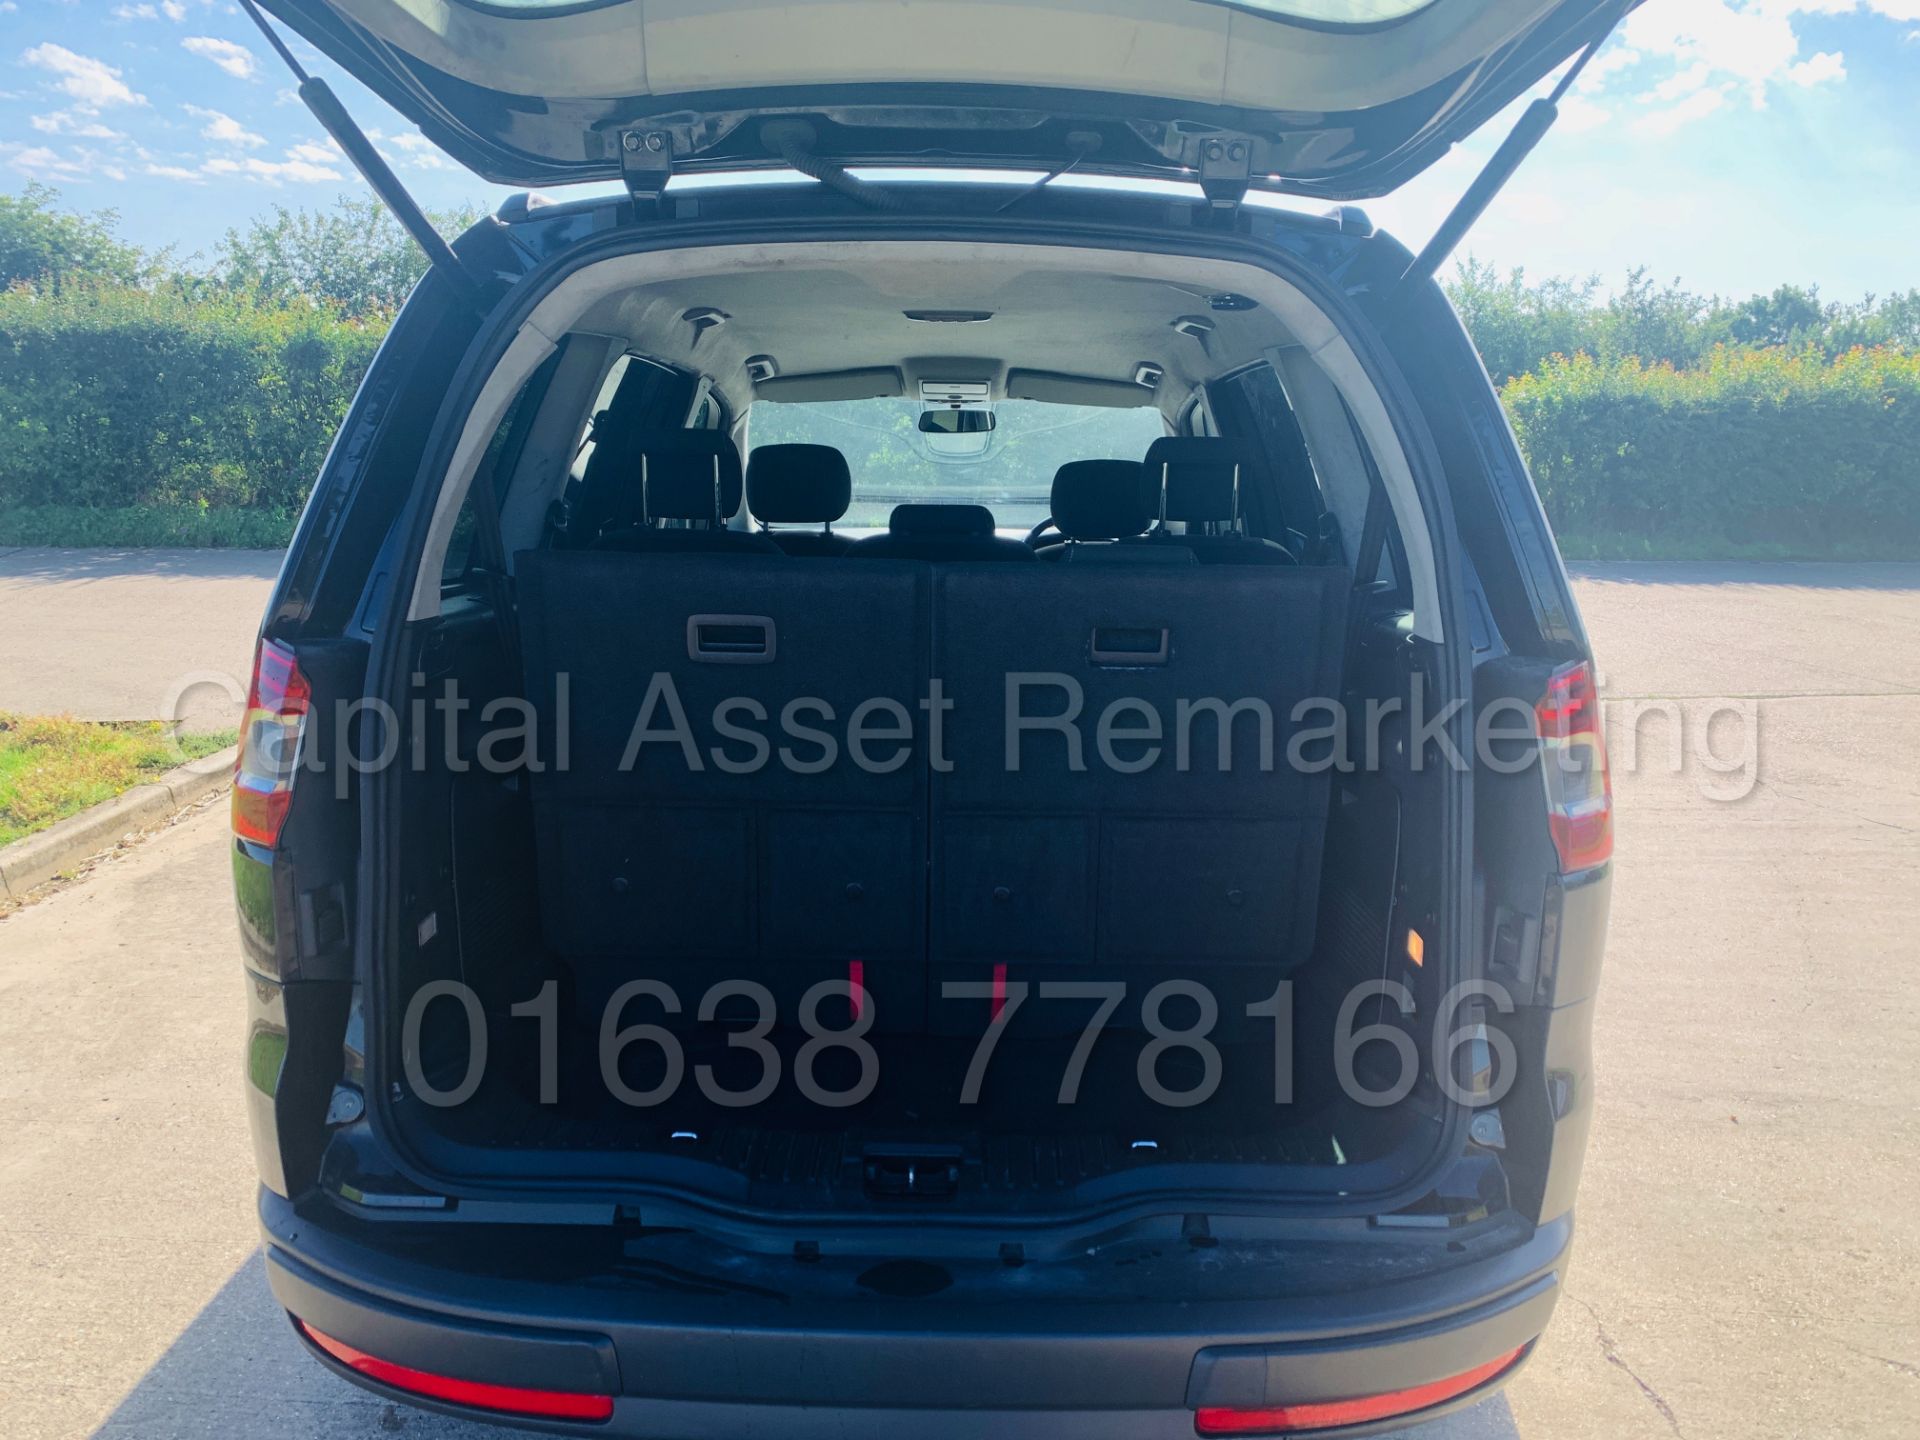 (ON SALE) FORD GALAXY *ZETEC* 7 SEATER MPV (2013) '2.0 TDCI - POWER SHIFT' (NO VAT - SAVE 20%) - Image 16 of 31